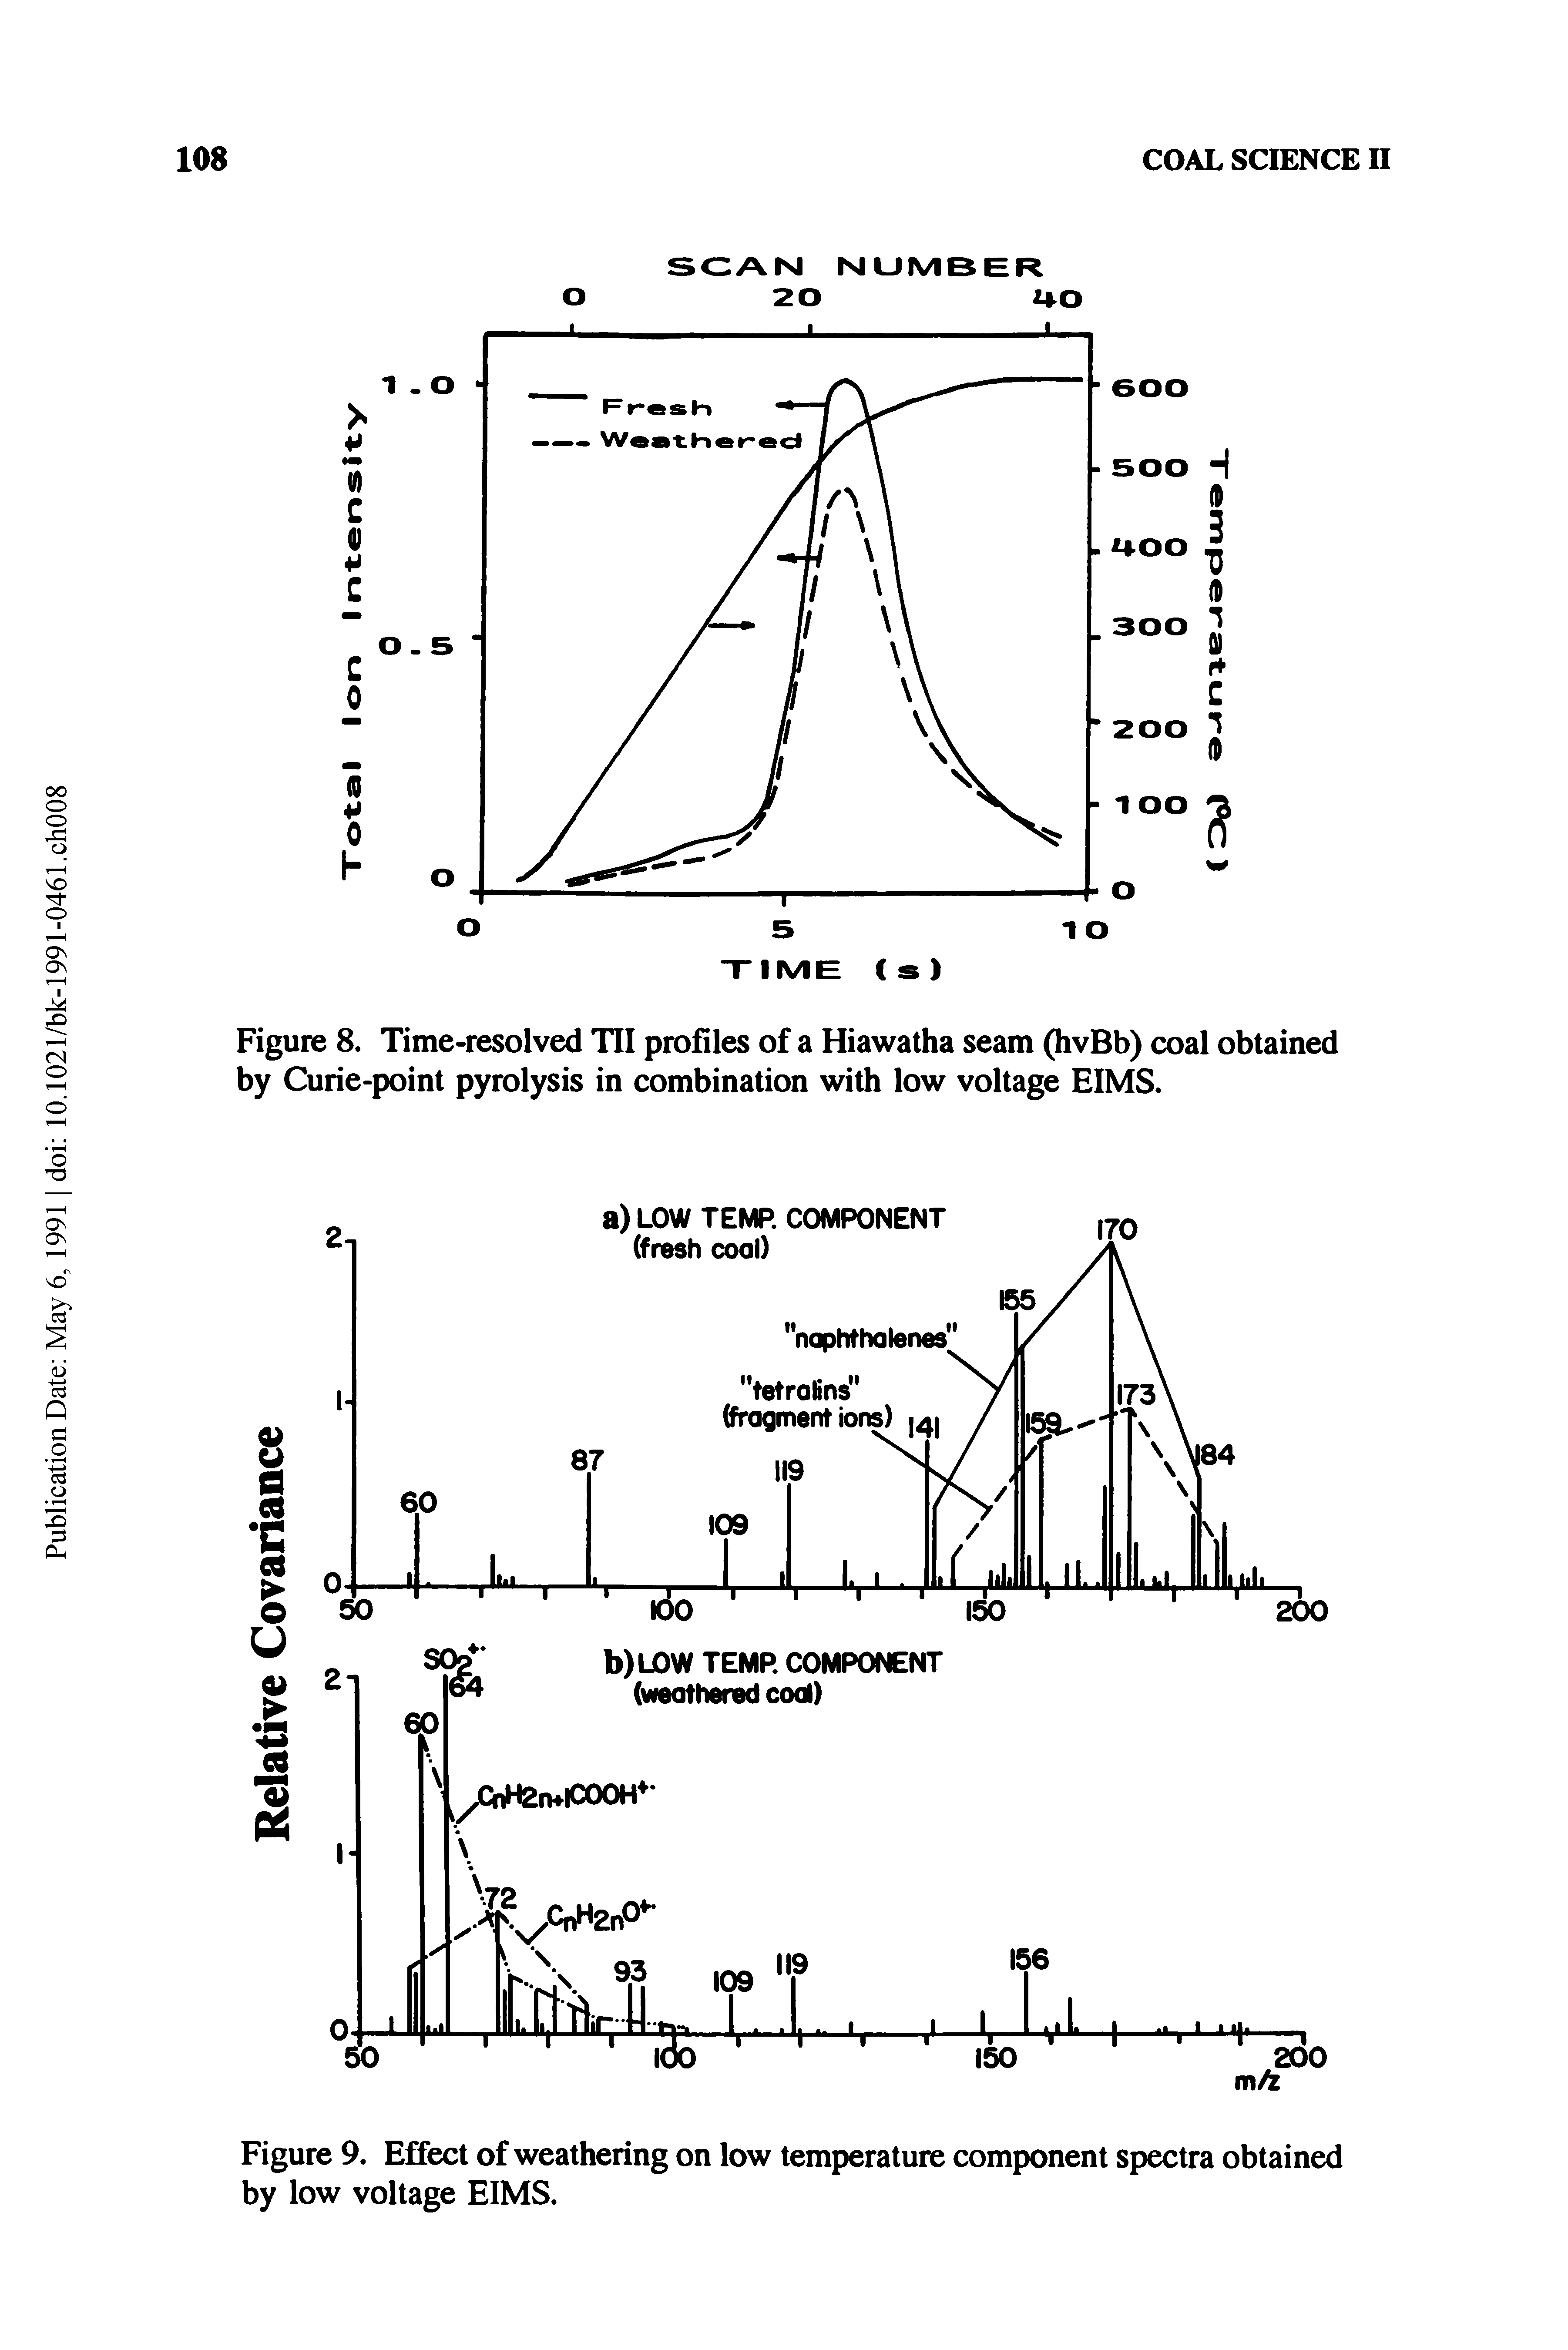 Figure 8. Time-resolved TII profiles of a Hiawatha seam (hvBb) coal obtained by Curie-point pyrolysis in combination with low voltage EIMS.